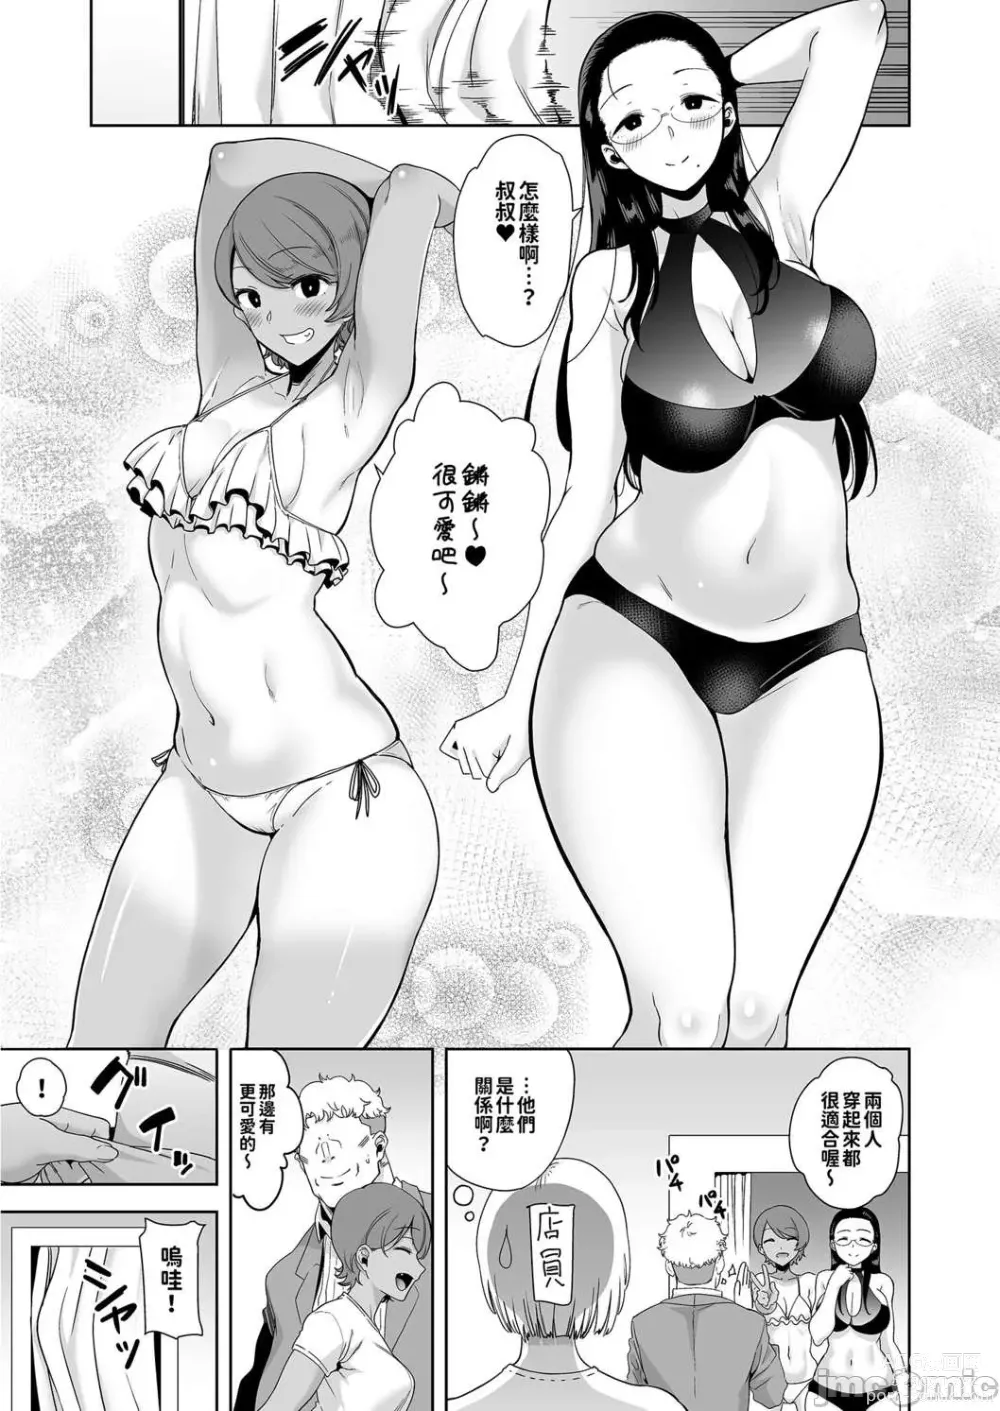 Page 9 of doujinshi 聖華女学院高等部公認竿おじさん 3